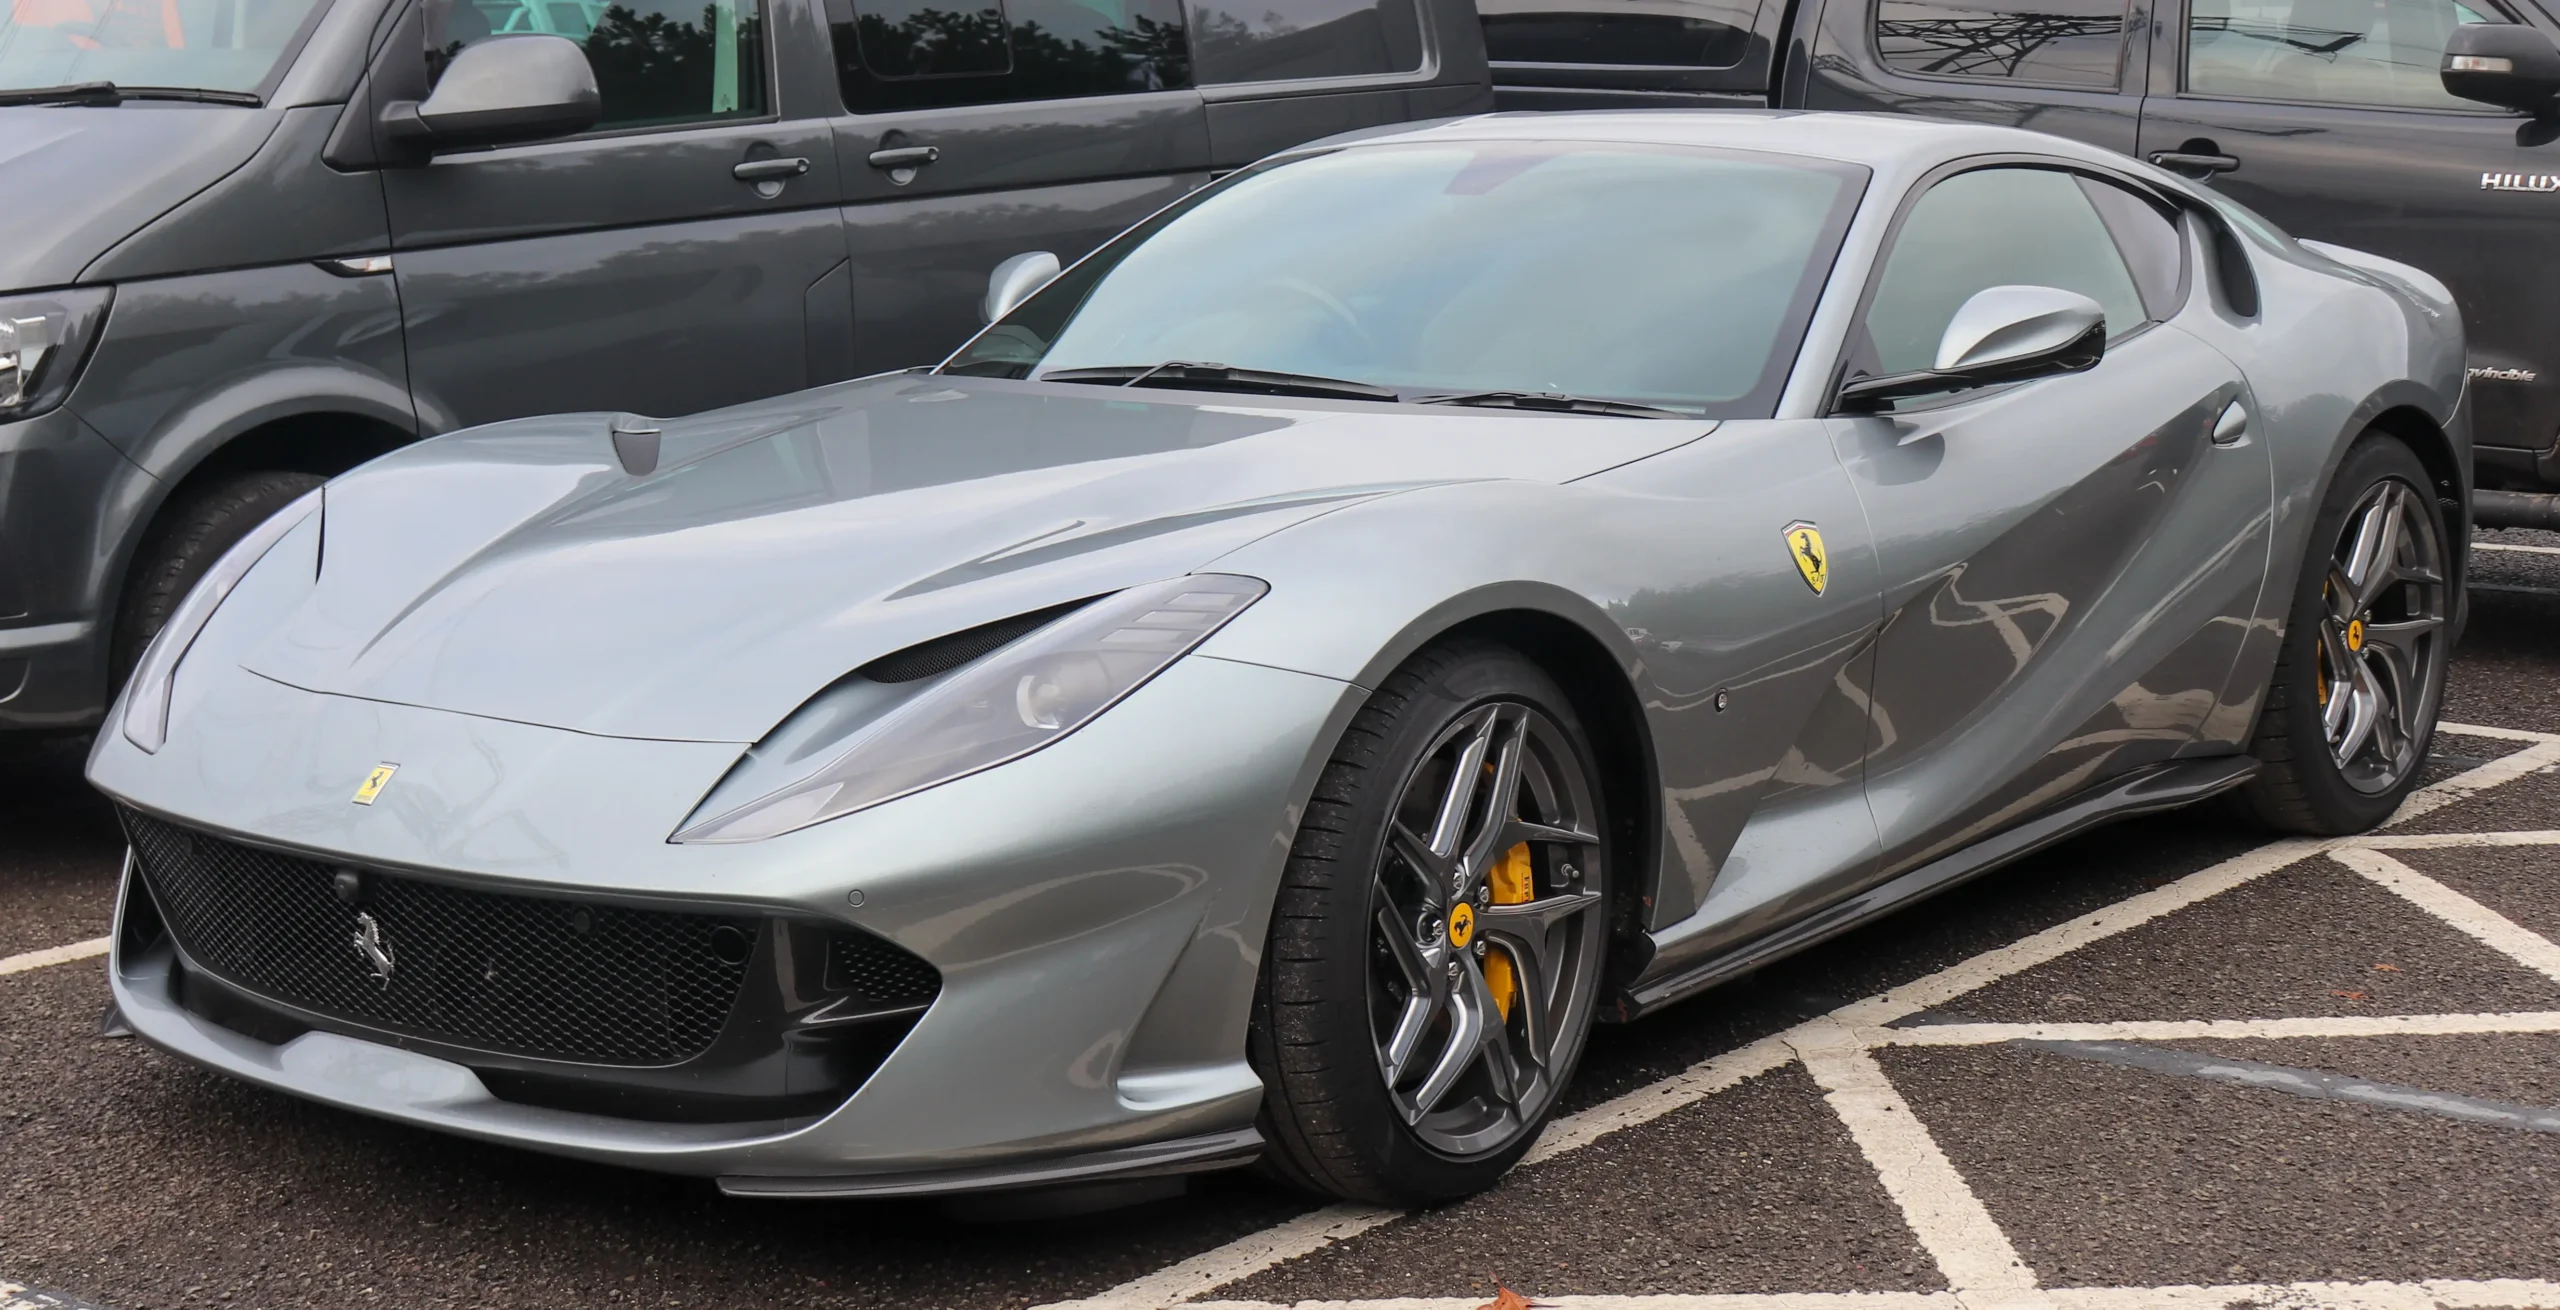 ferrari 812 superfast specs - Does the 812 Superfast have a V12